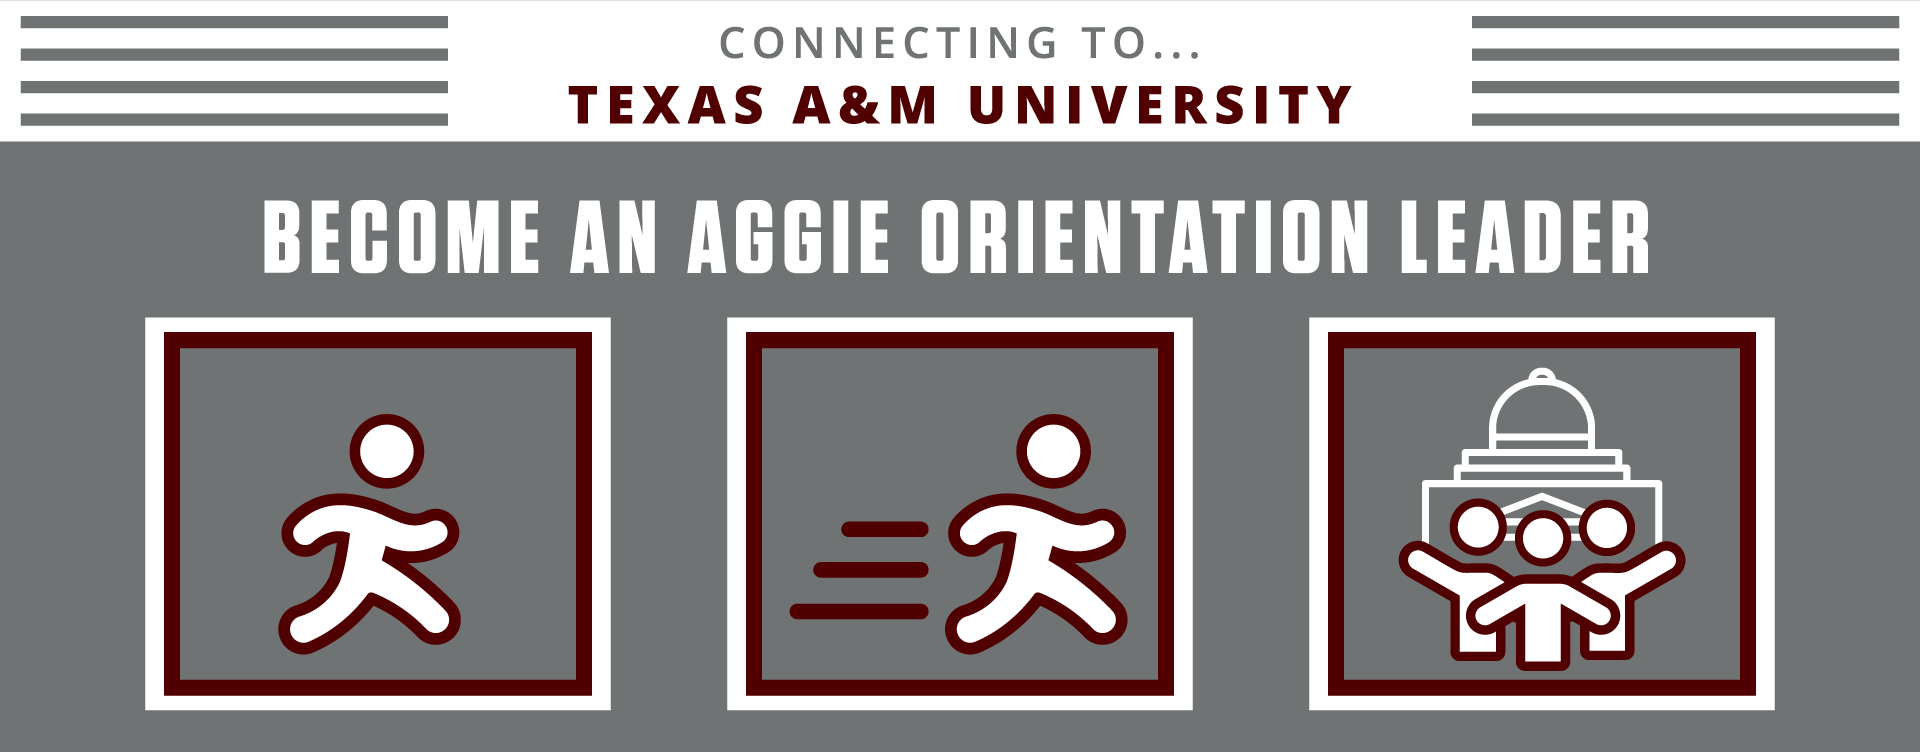 Connecting to Texas A&M University. Become an Aggie Orientation Leader. Deadline: October 24.